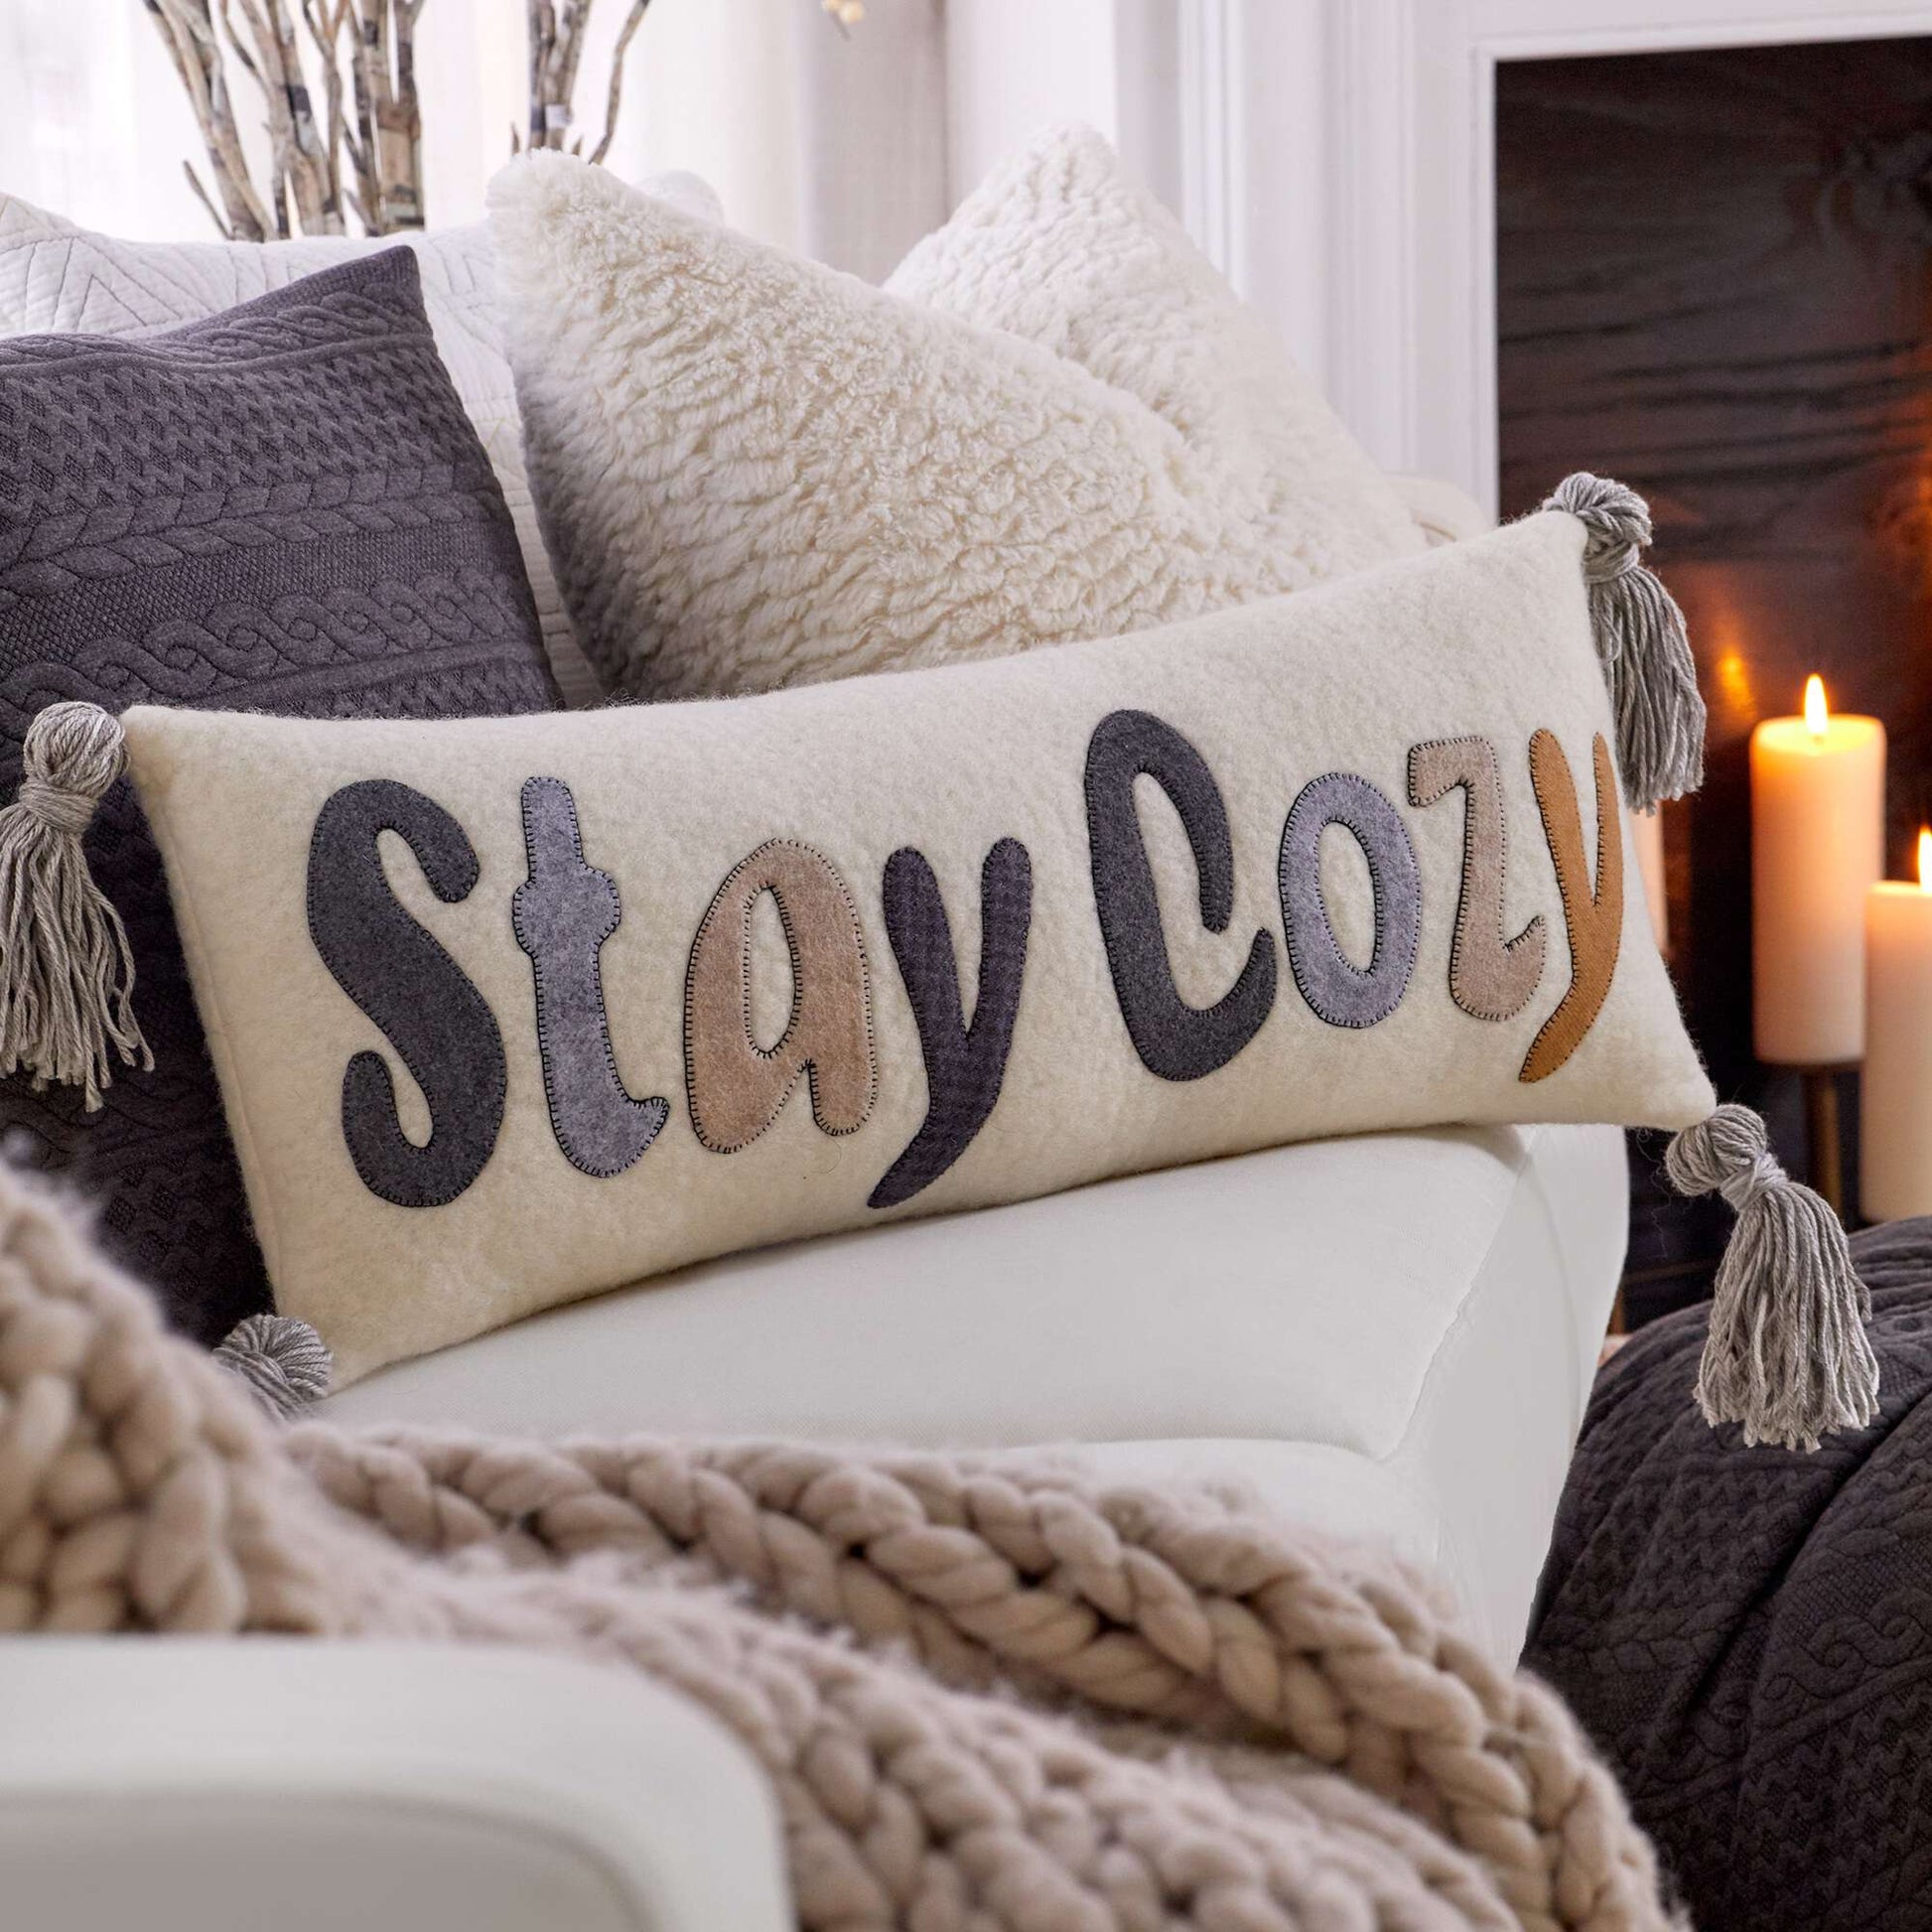 Free Coats Sewing & Clark Stay Cozy Pillow With Tassels Pattern